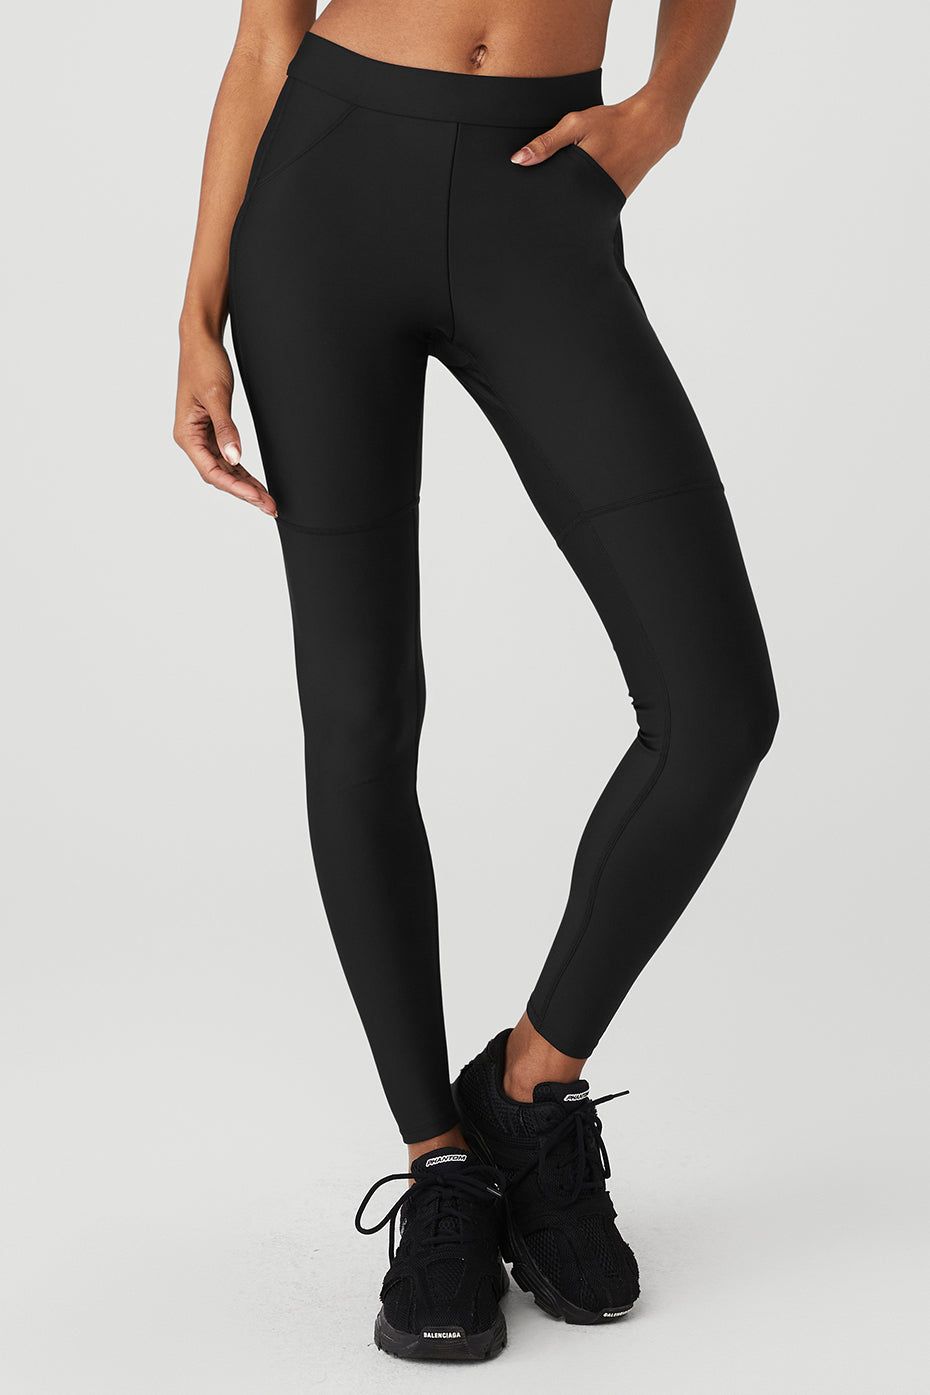 Alo Yoga's Black Airbrush Legging Is 41% Off Right Now